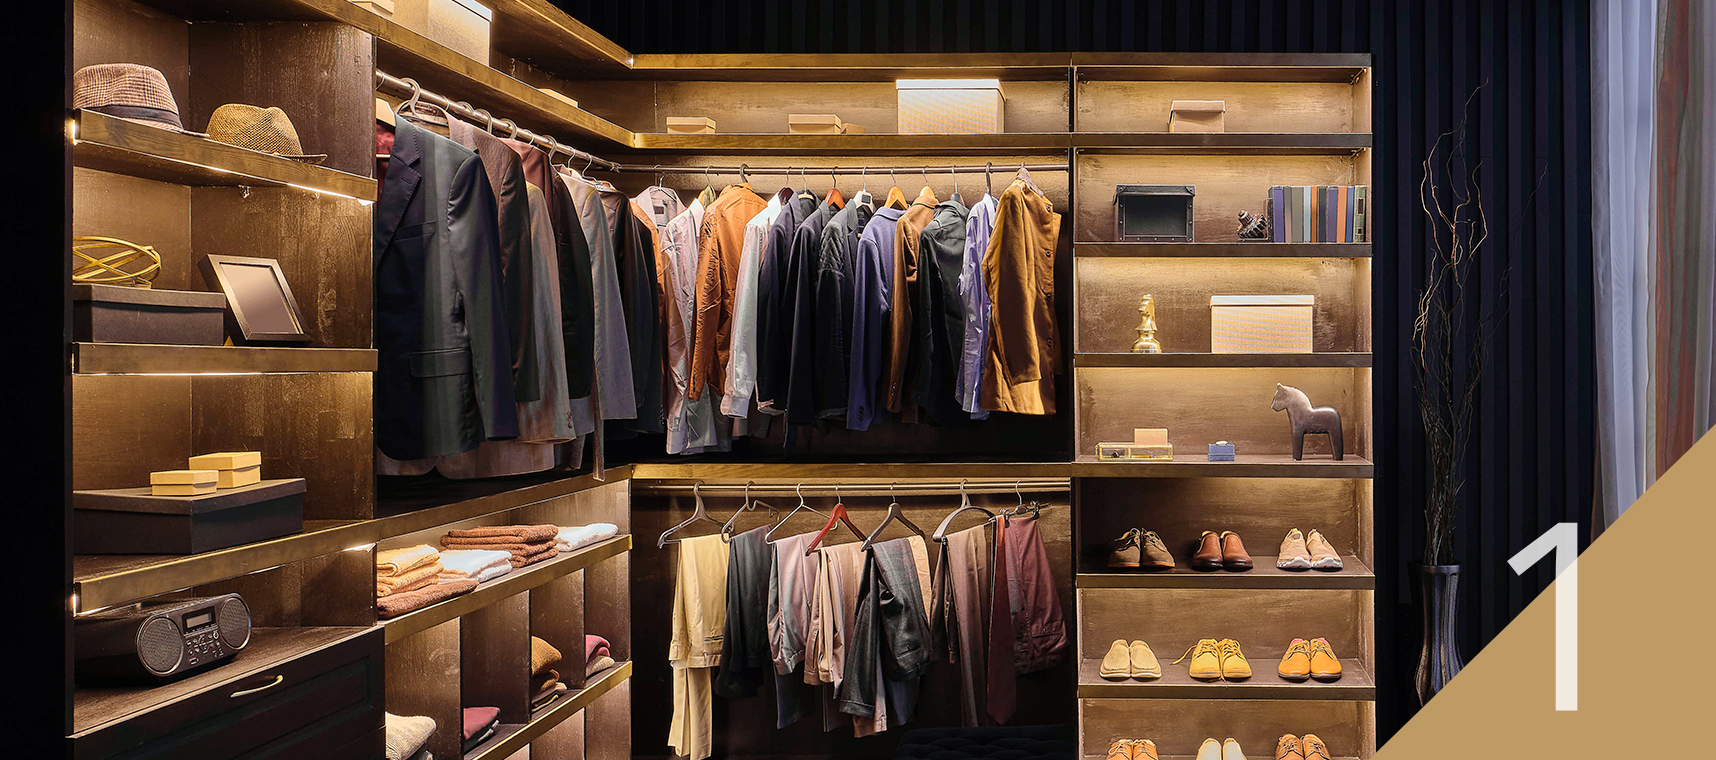 Wardrobe showing a selection of outfits and accessories, as an analogy for the different types of financial instruments available.